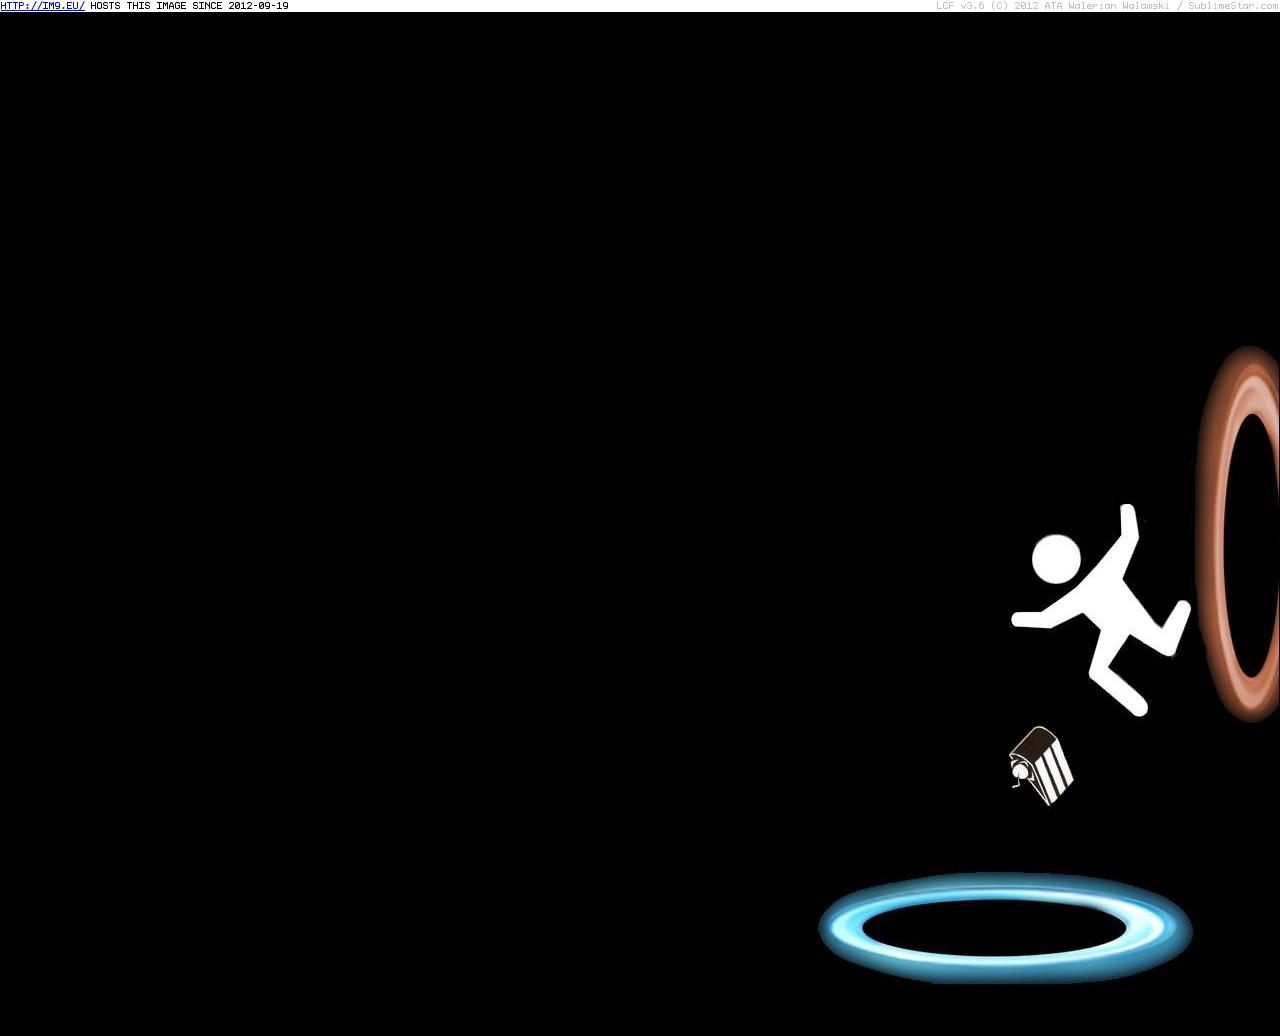 Video Game Portal 23955 (in Games Wallpapers)